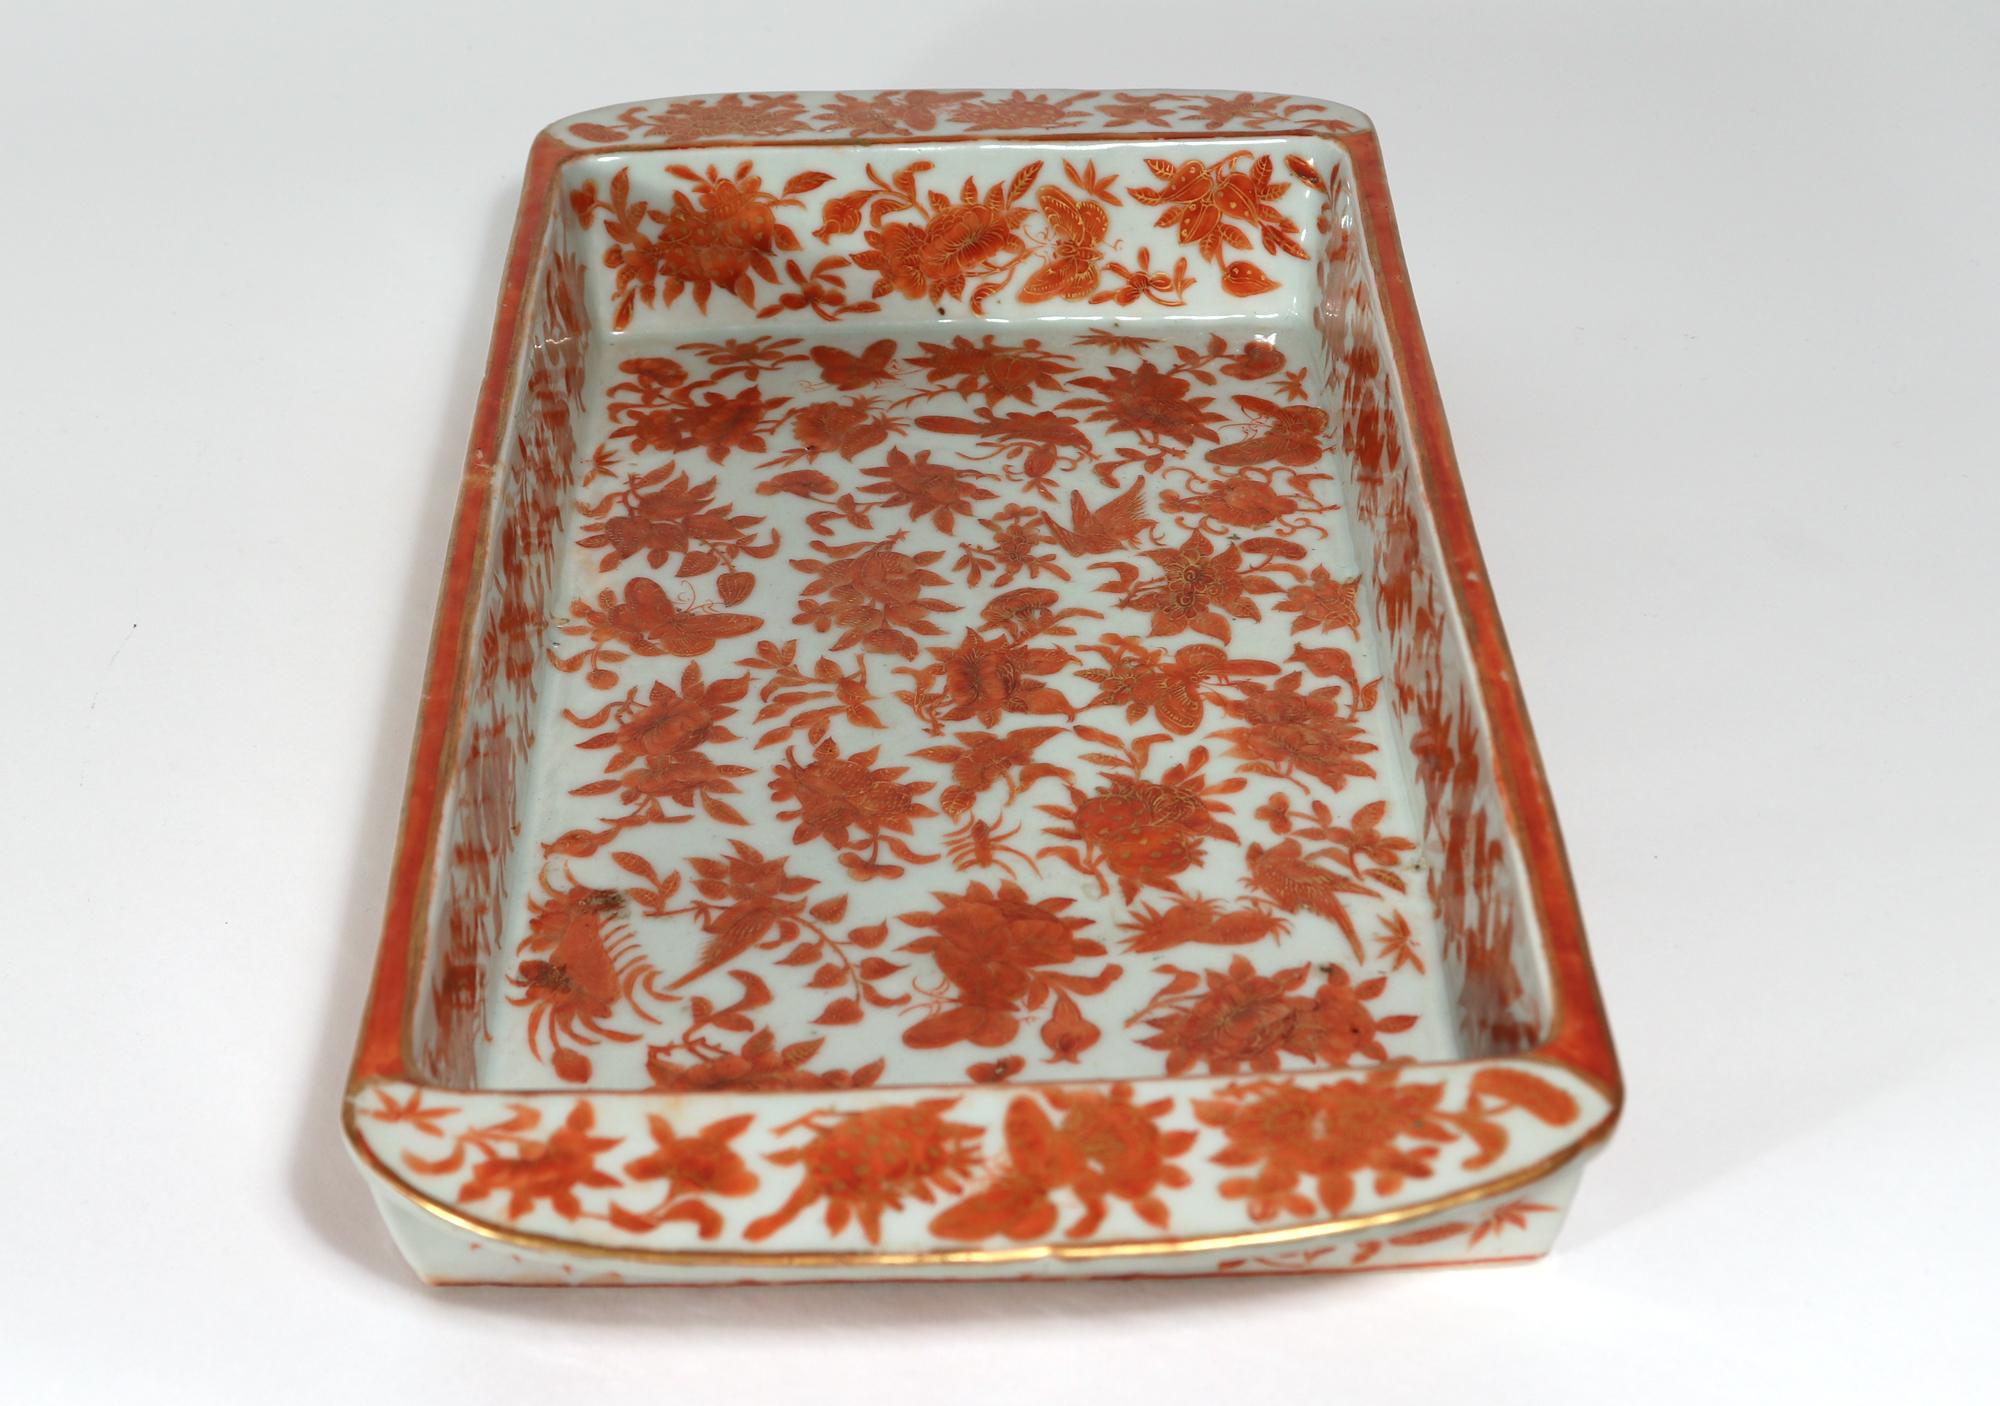 Chinese export porcelain sacred bird & butterfly pattern large bulb tray,
Circa 1820-50

The Chinese Export porcelain tray is painted with an overall pattern in orange of the sacred bird & butterfly pattern. This is of a particularly large shape